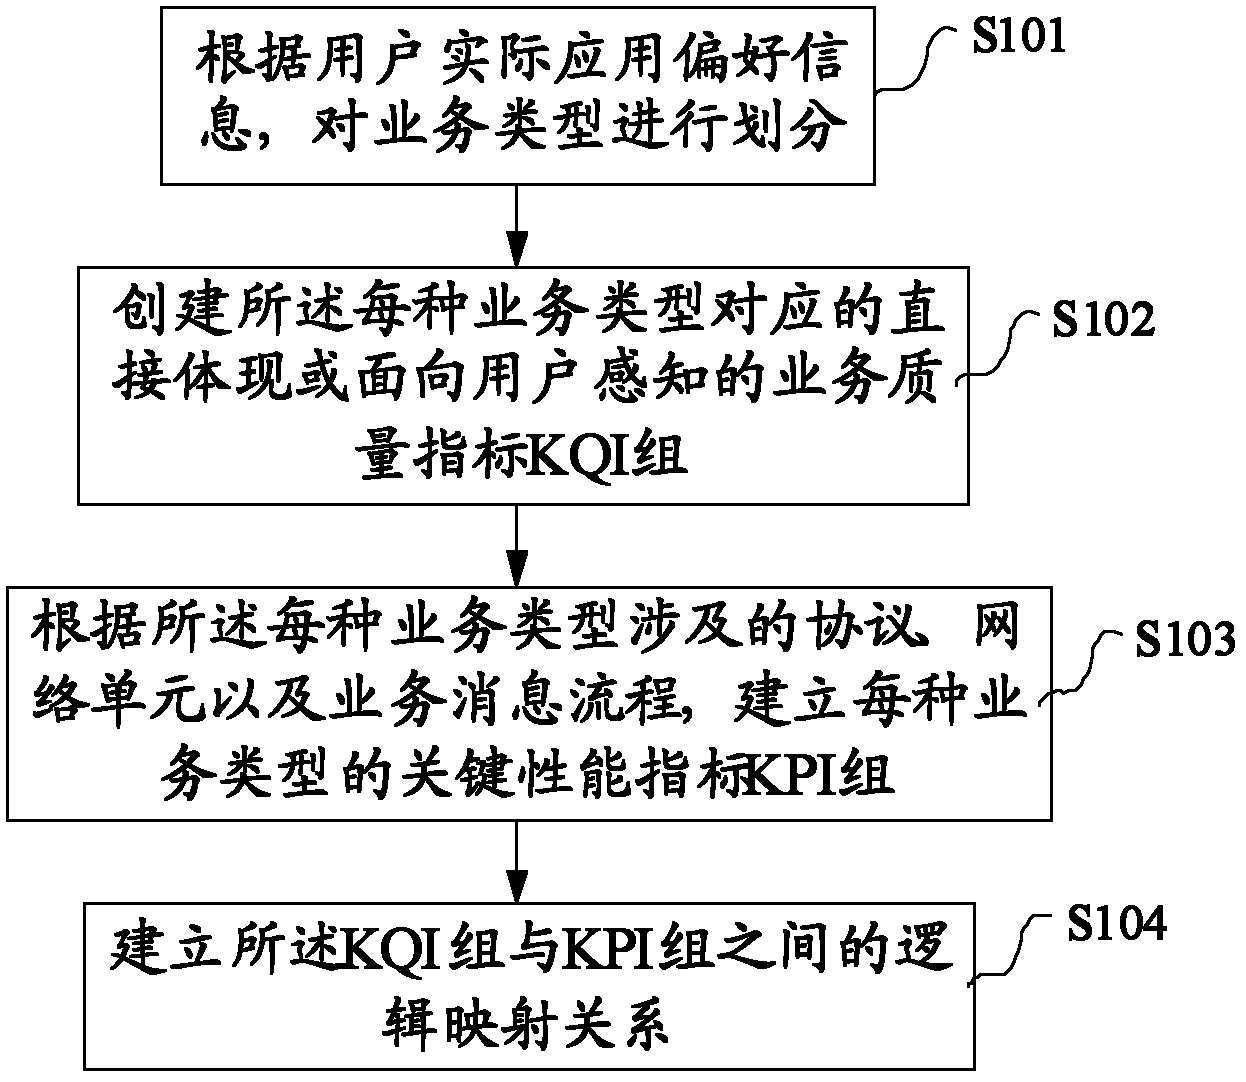 Method and system for constructing communication service quality evaluation system